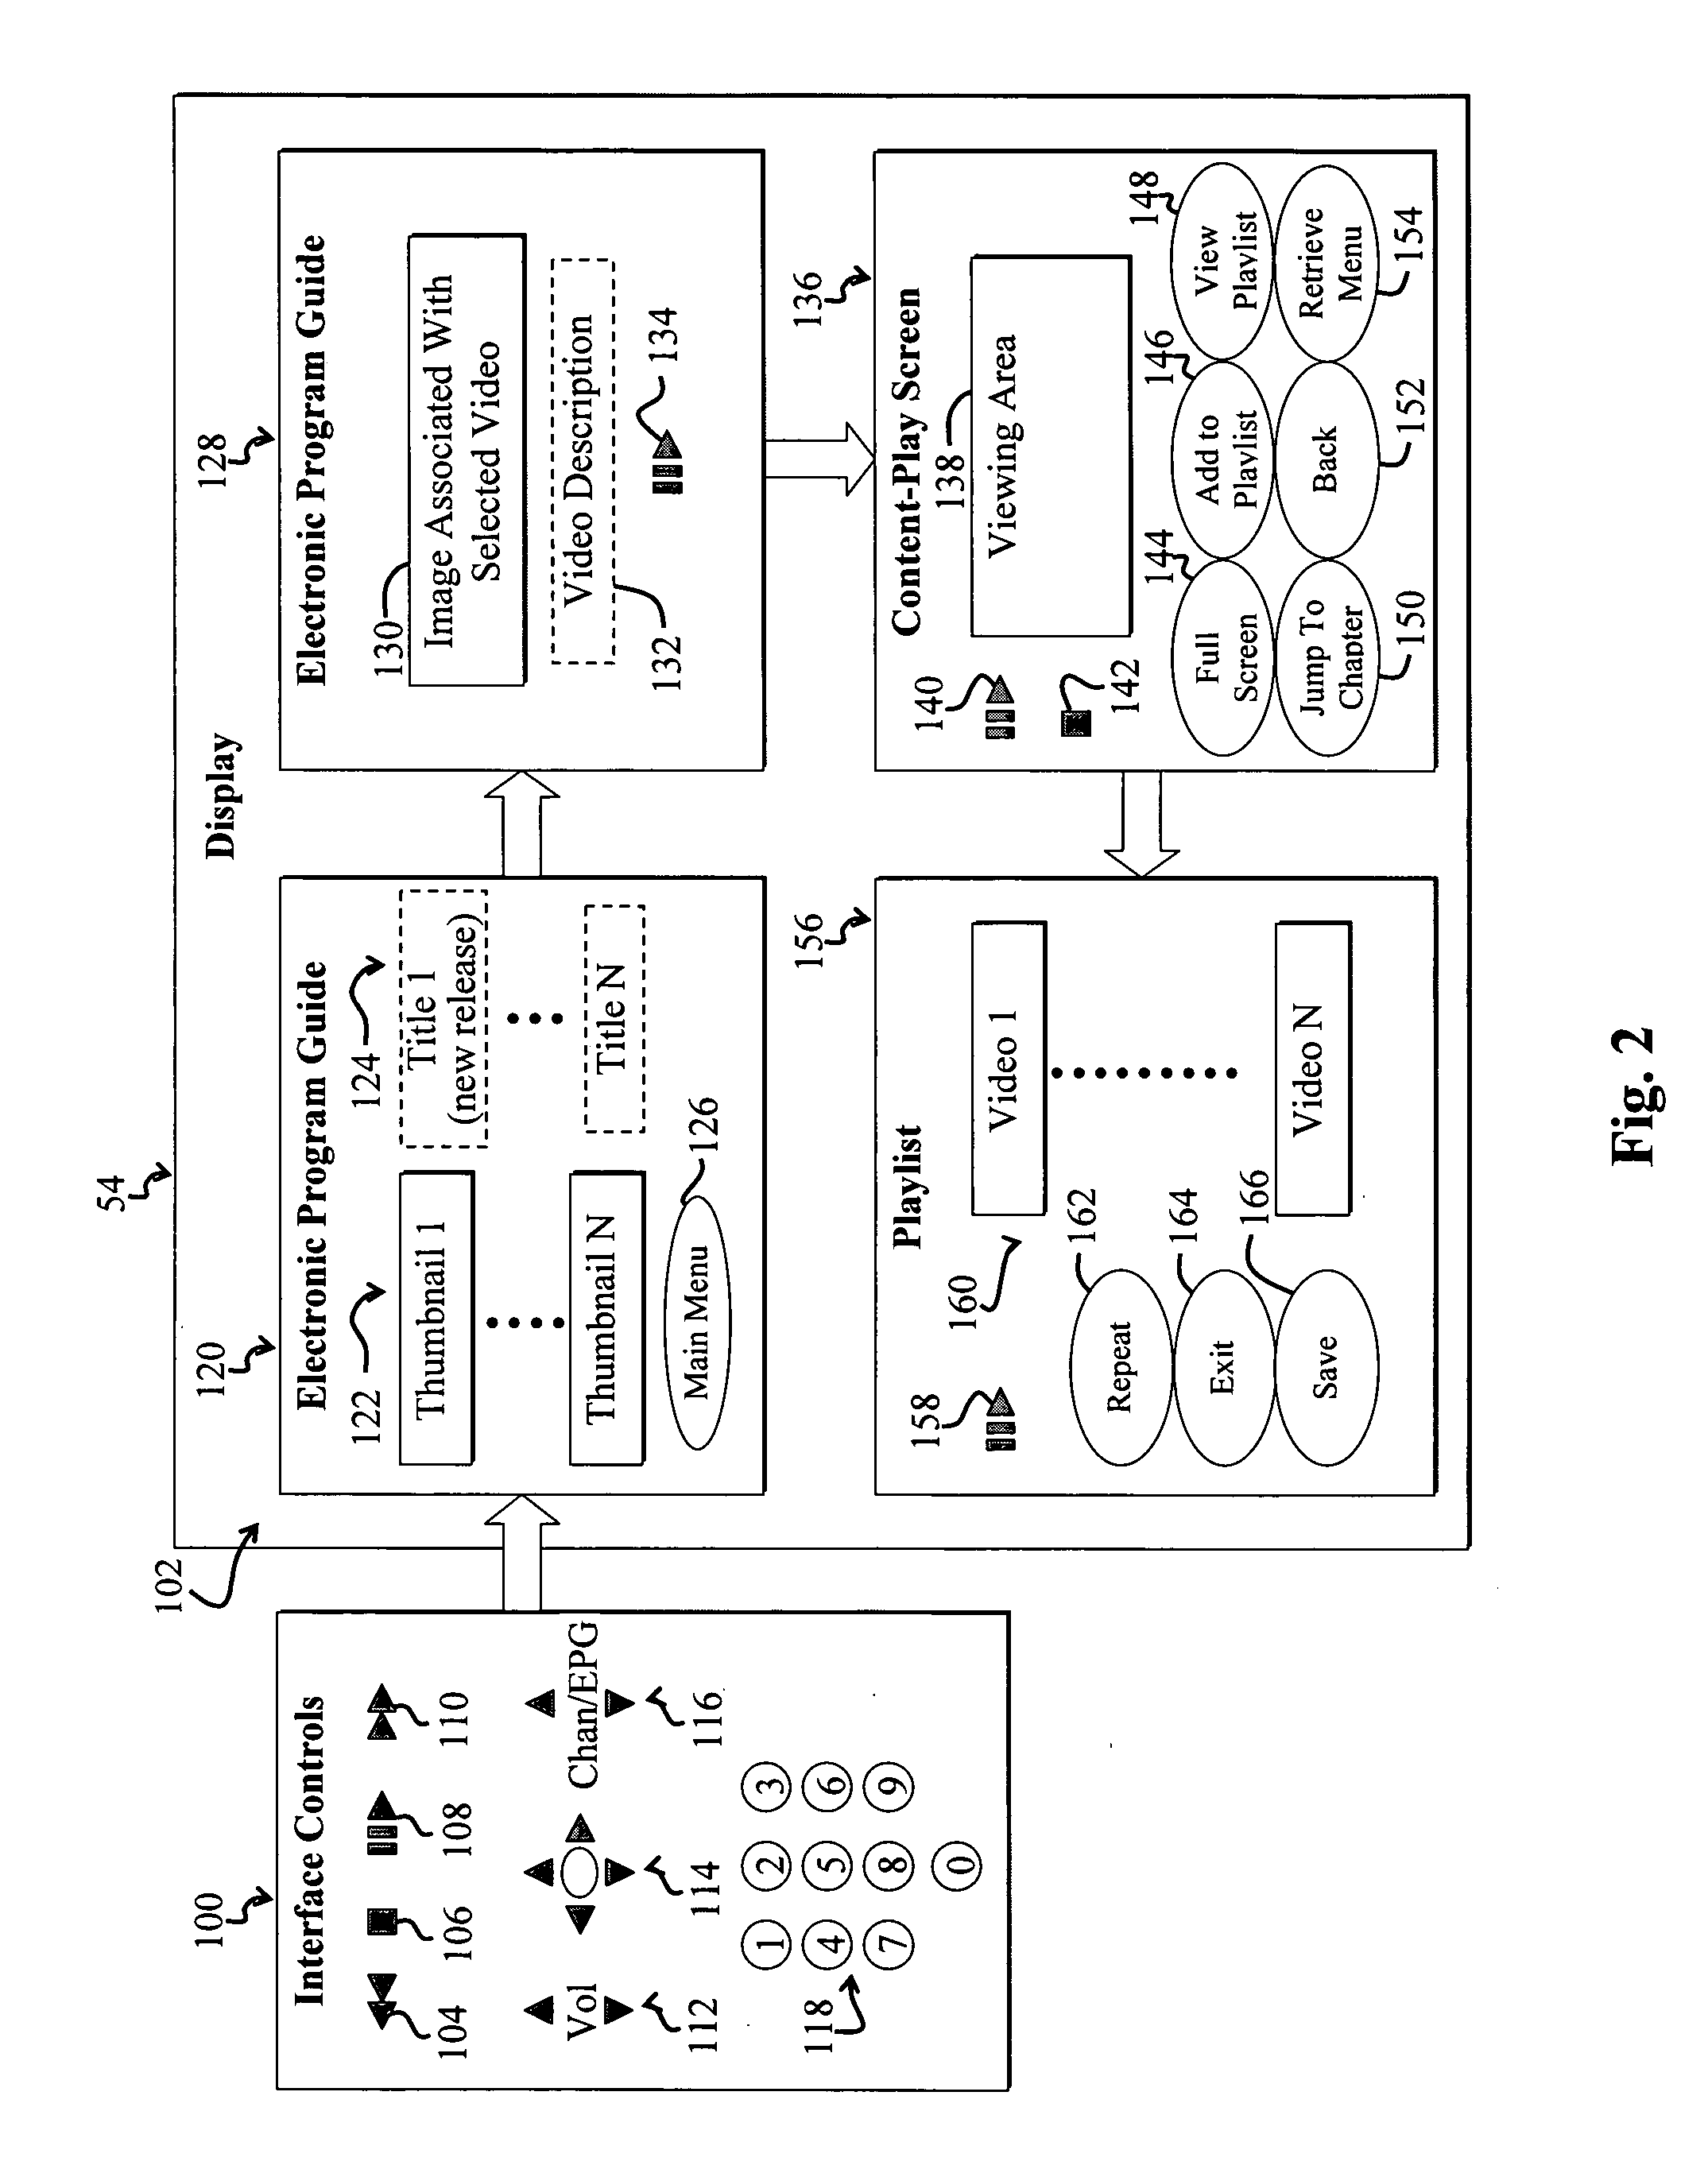 System and method for transferring content via a network